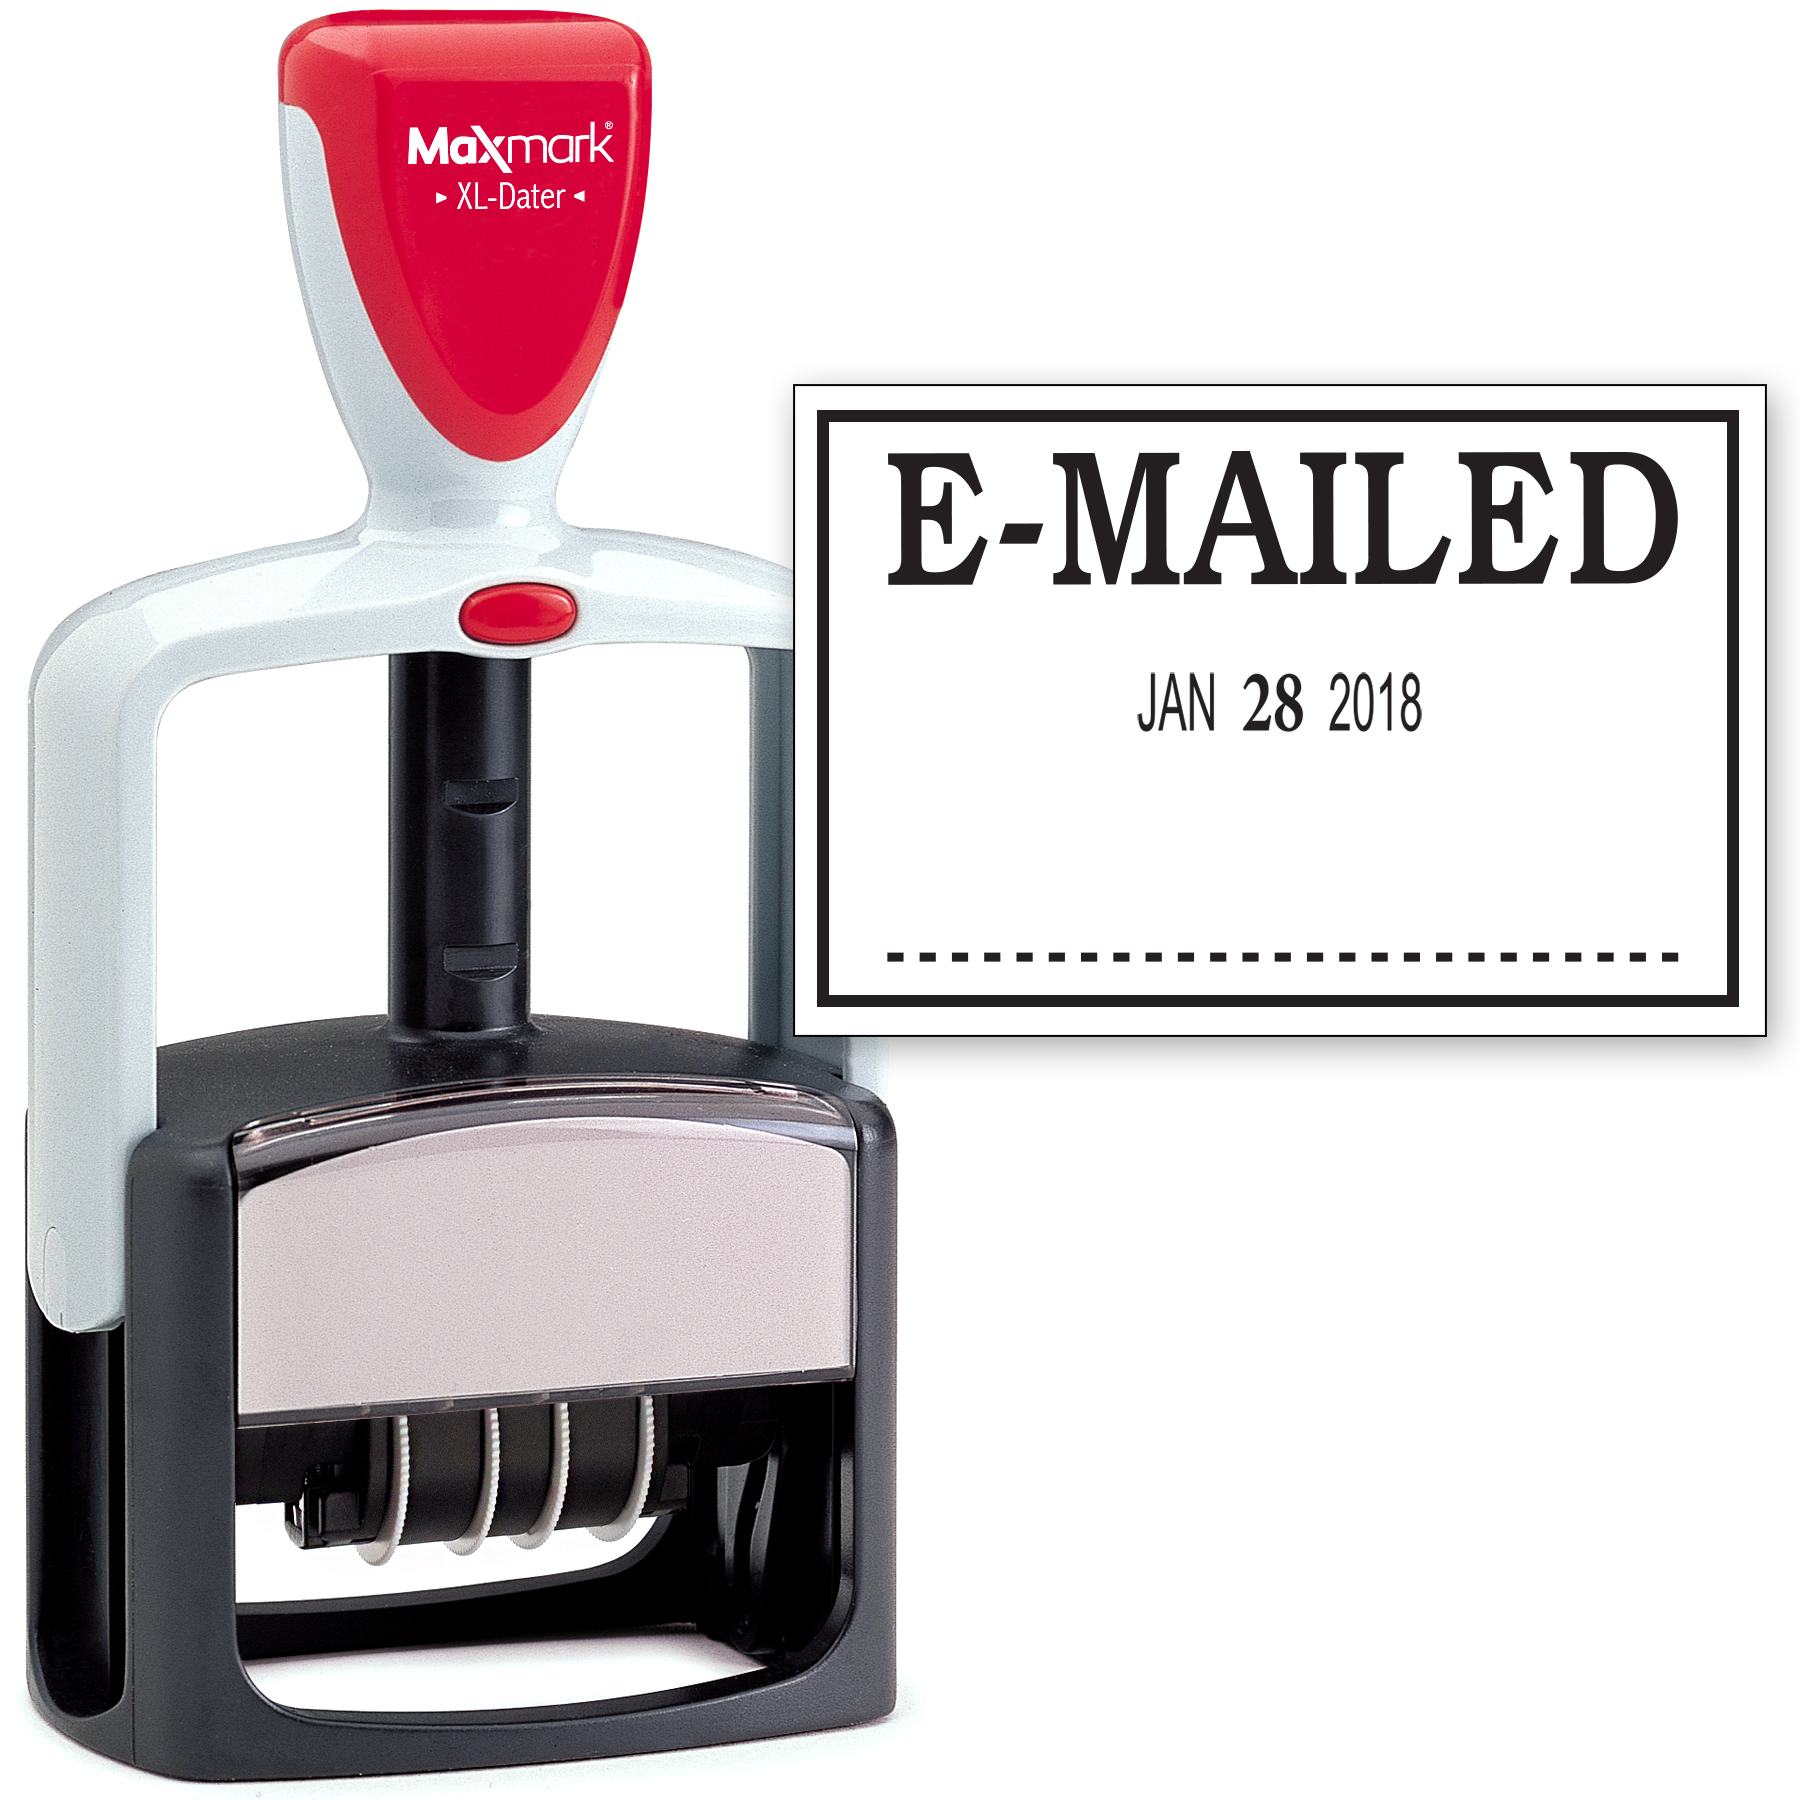 2000 PLUS Heavy Duty Style 2-Color Date Stamp with E-MAILED self inking stamp - Black Ink